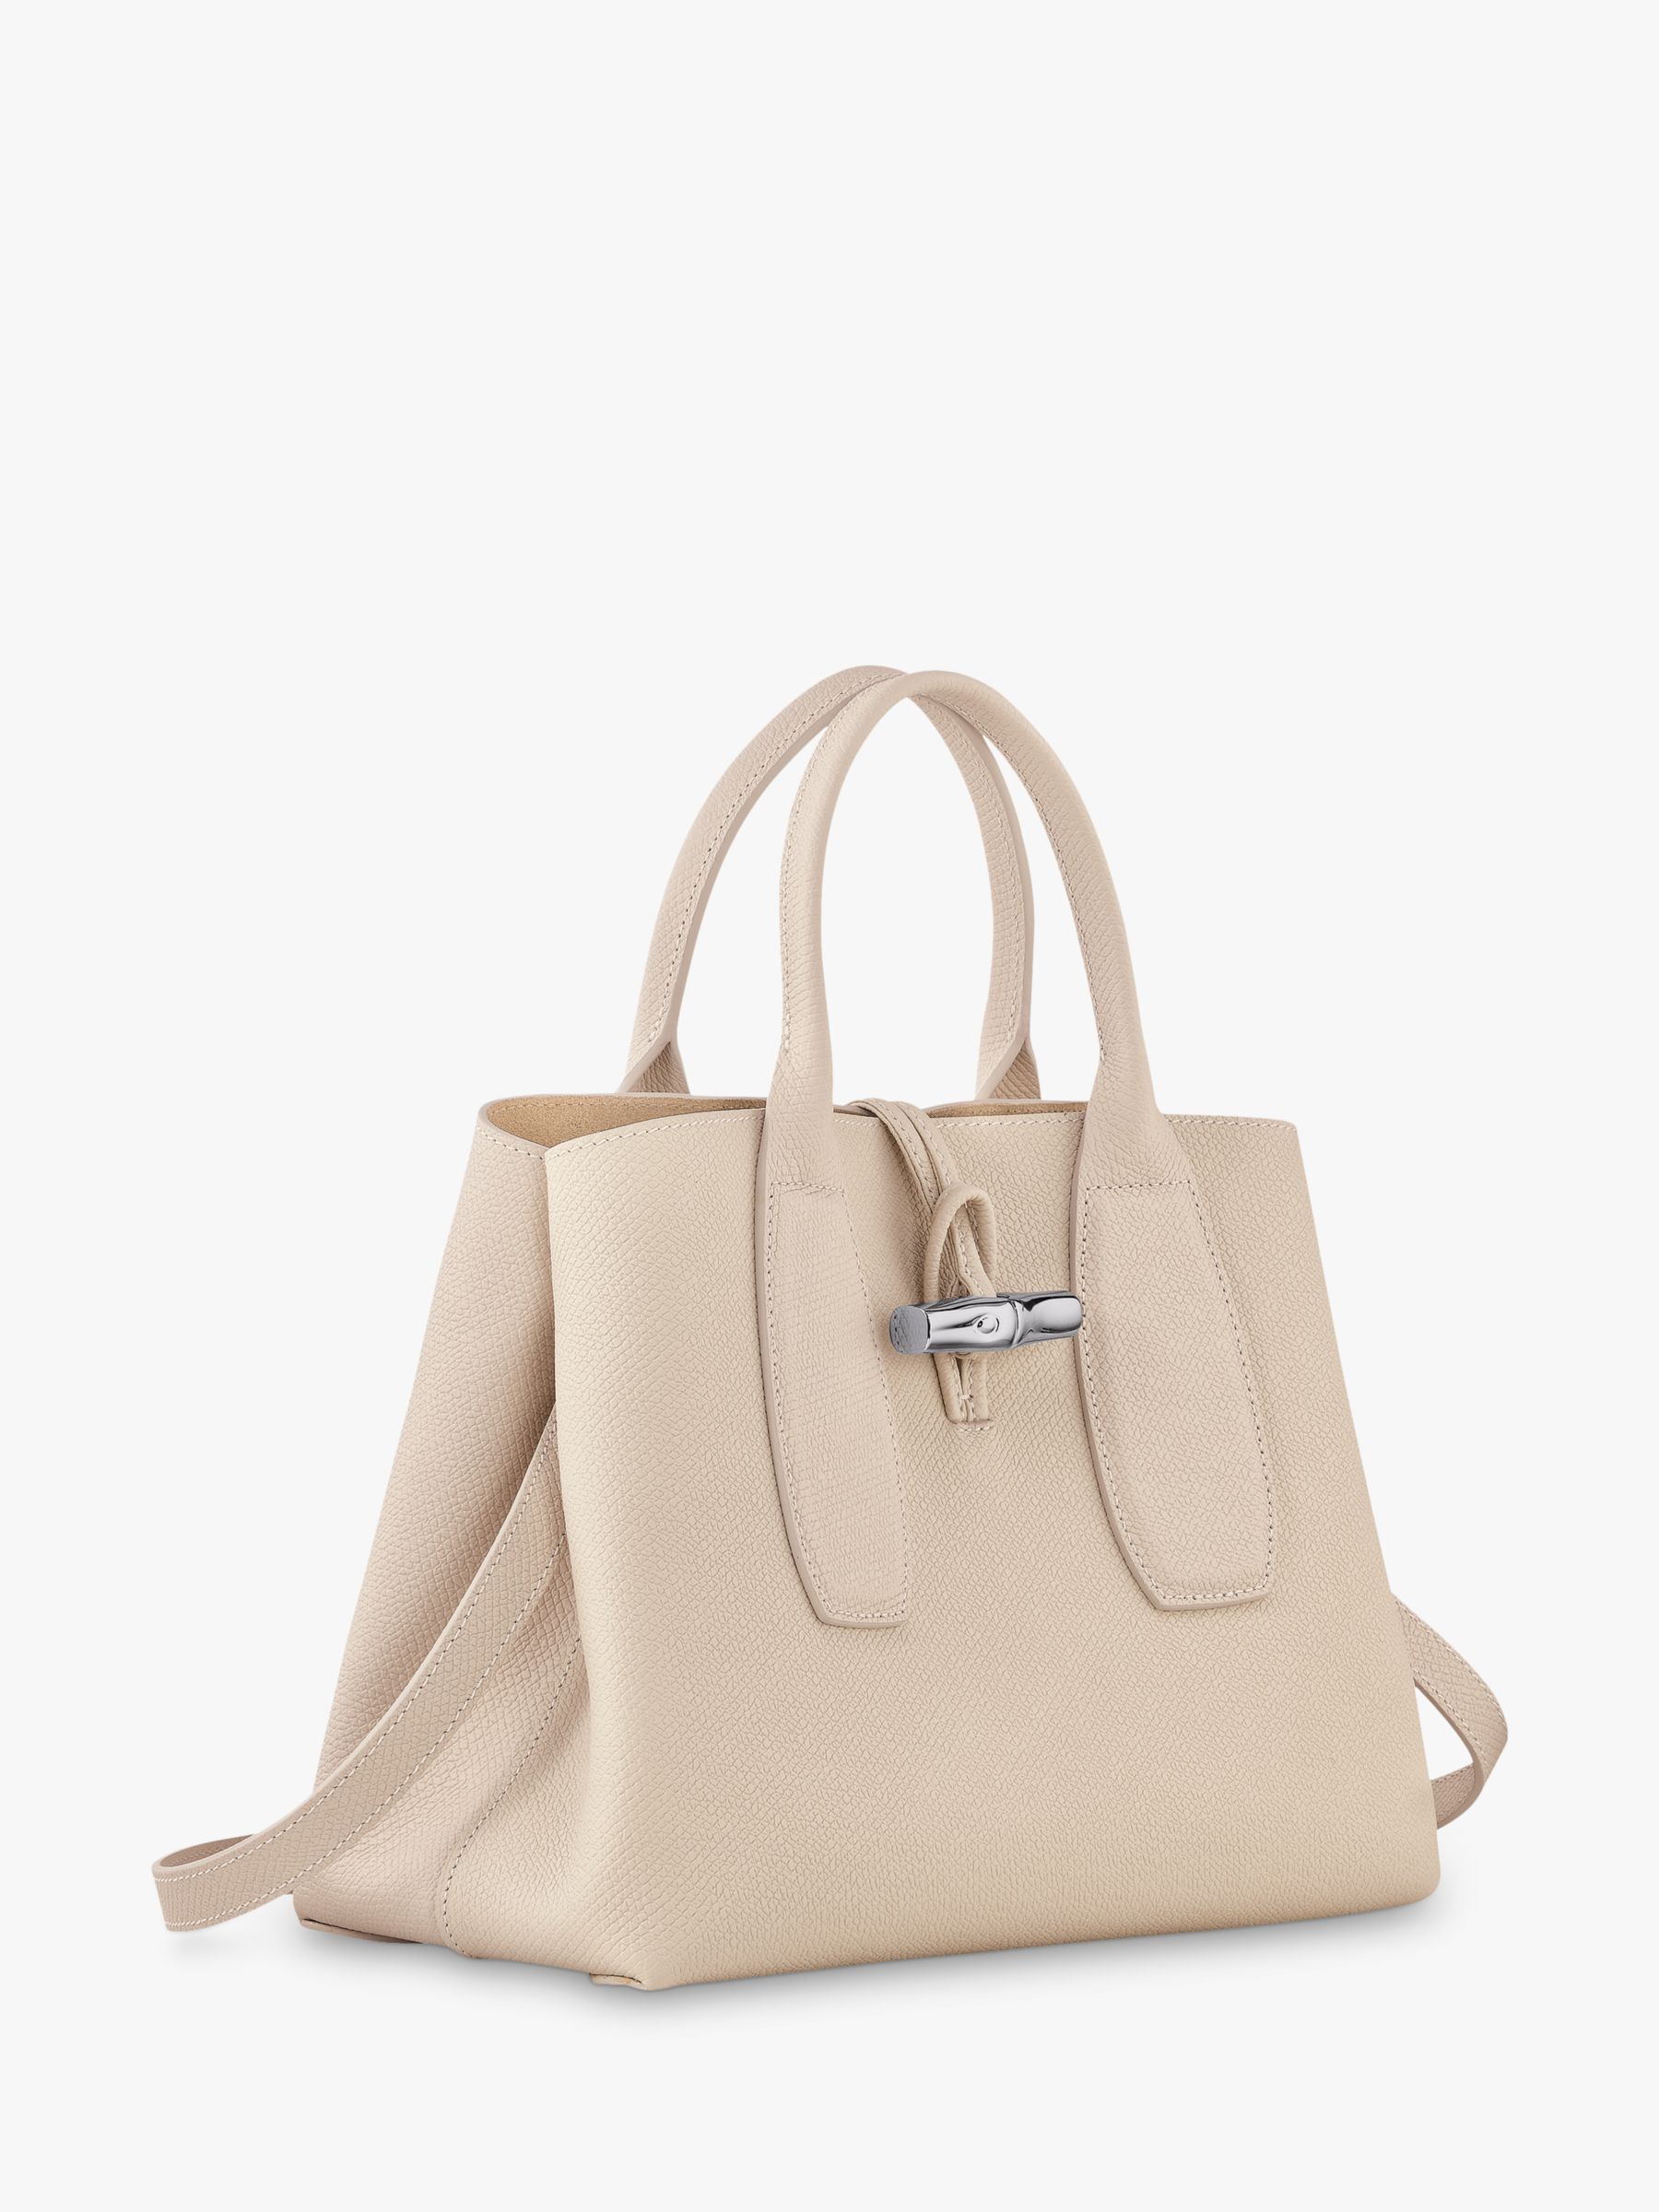 Longchamp Sand Top-Handle Roseau Leather Satchel, Best Price and Reviews